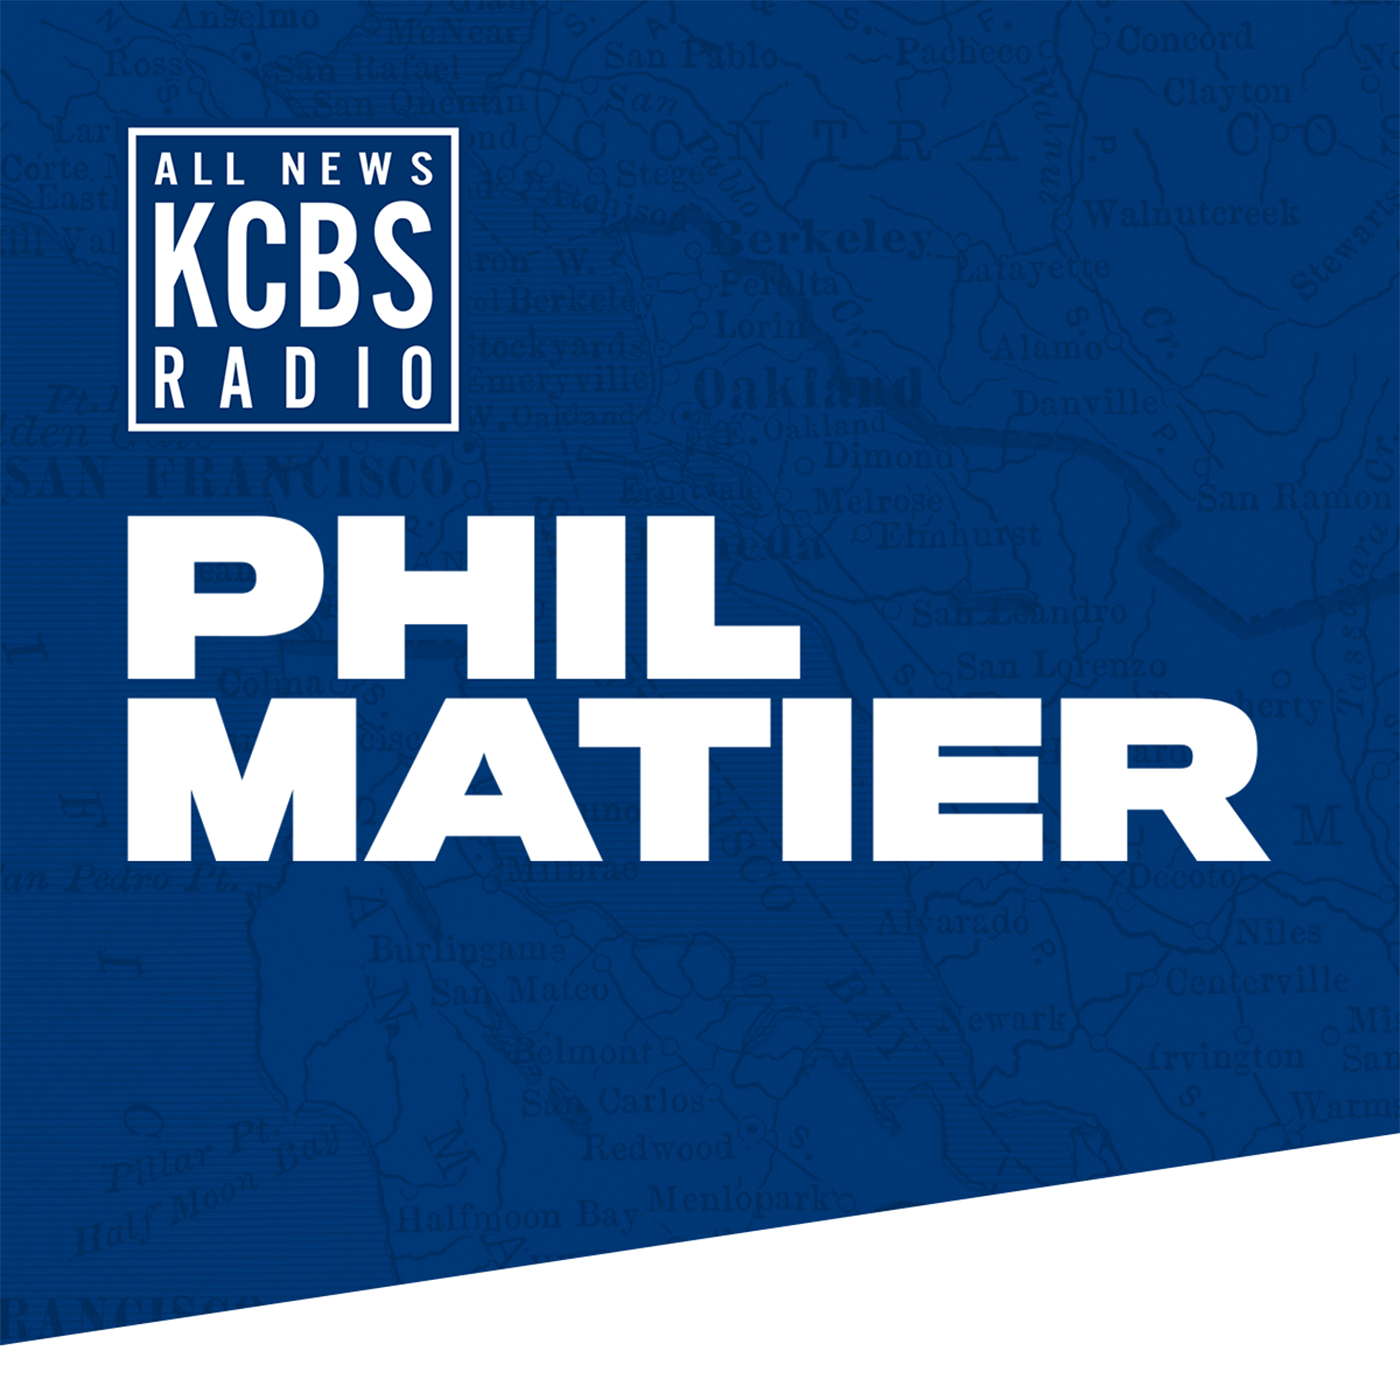 Phil Matier & Willie Brown: Mayor London Breed clears up comments made earlier this week